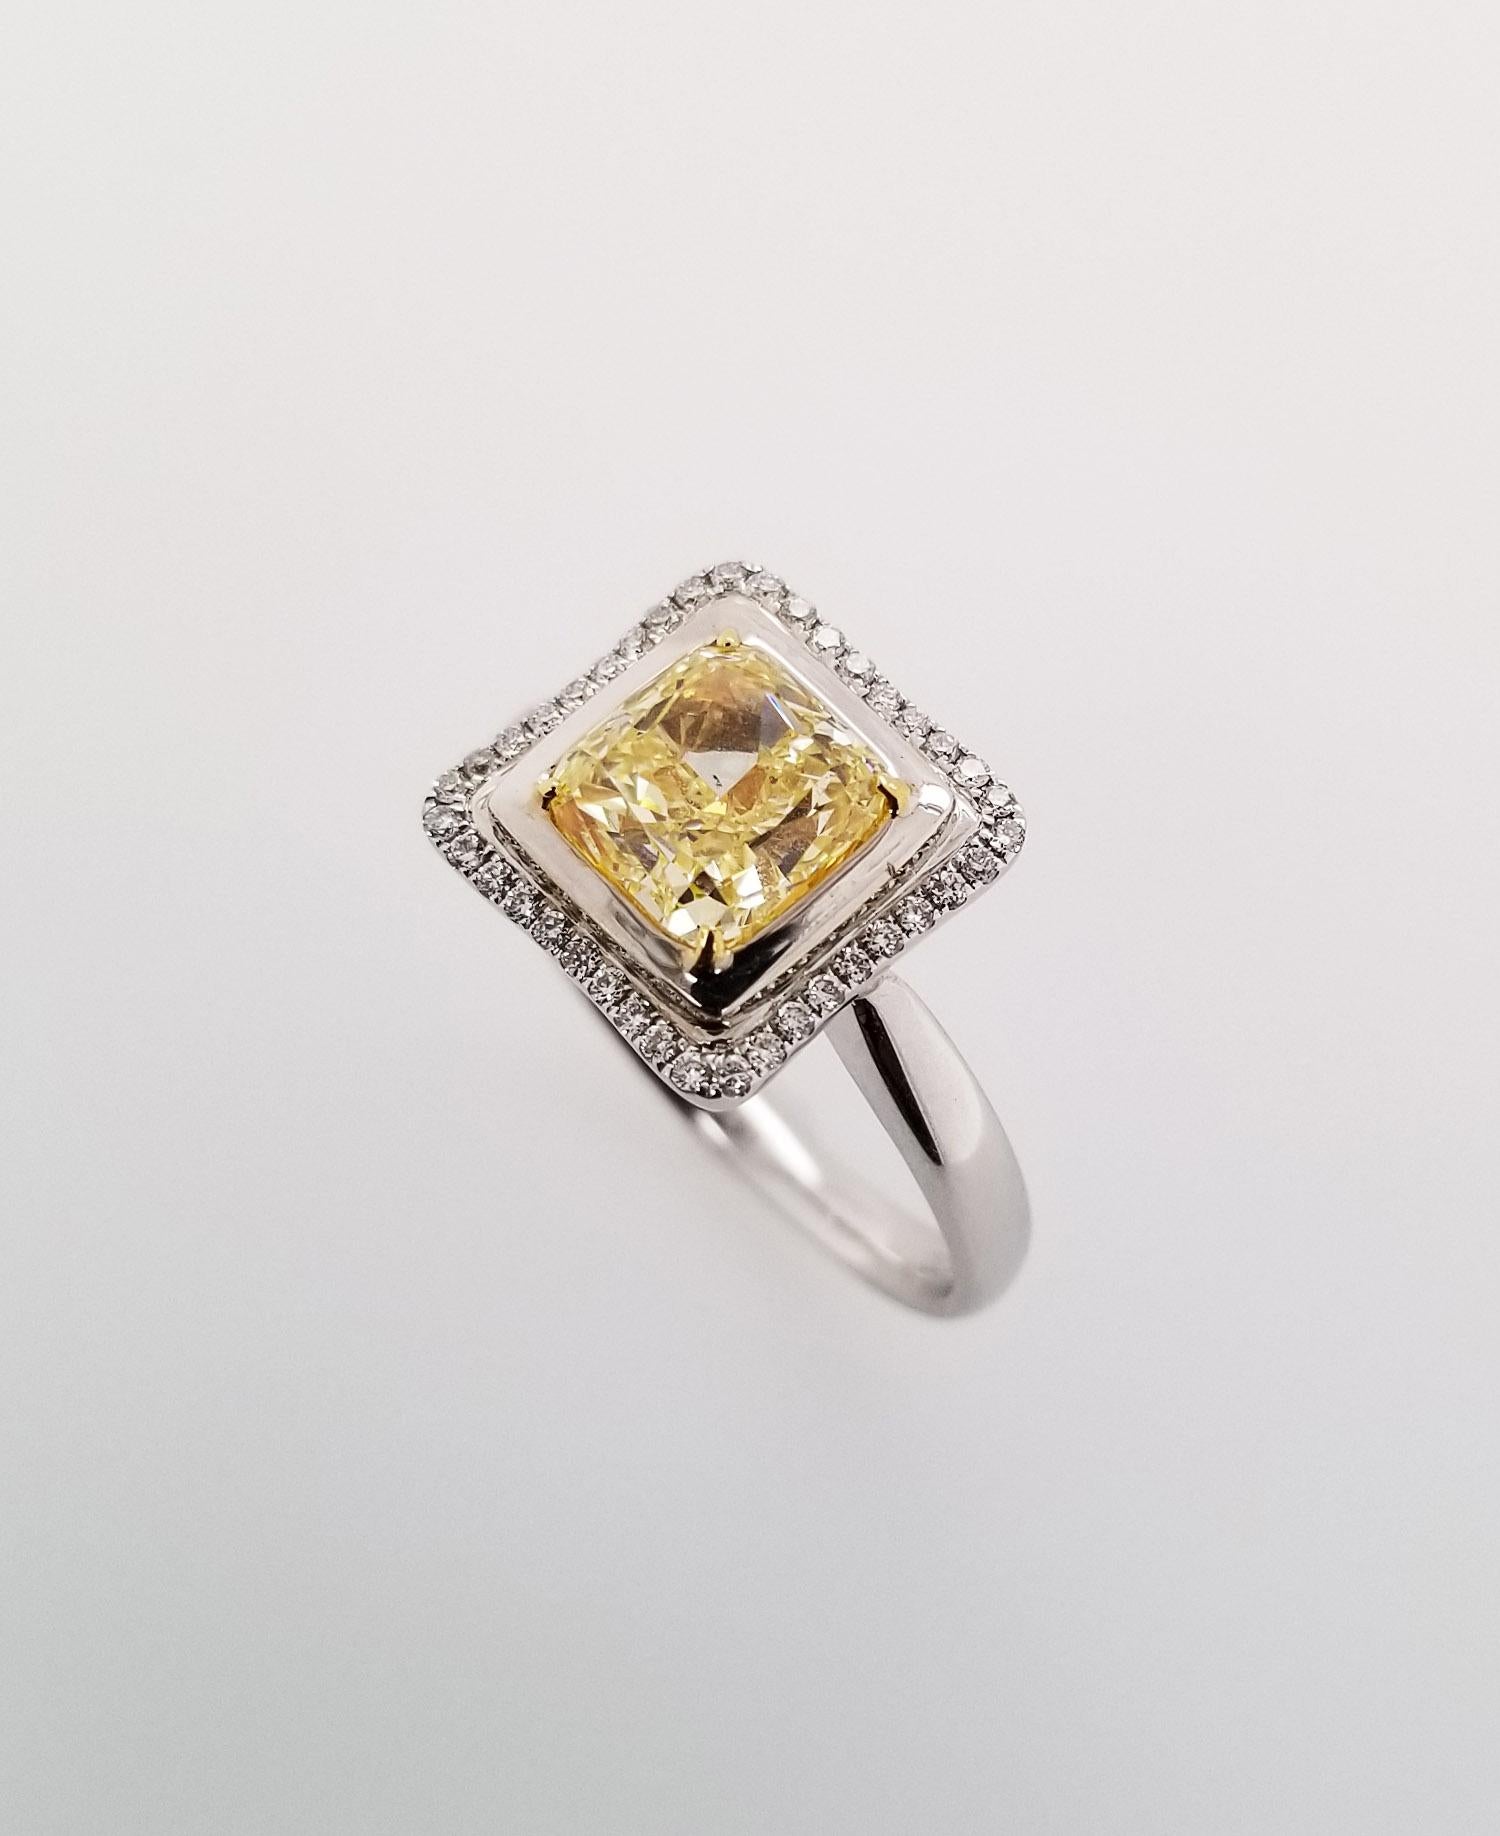 2.02 Carat Fancy Yellow GIA-Certified Radiant Cut SI1 Diamond Engagement Ring with 18 Karat White Gold. Features a halo-setting with a row of white round cut diamonds, TCW 0.13. Resizable upon request.

This remarkable engagement ring highlights an